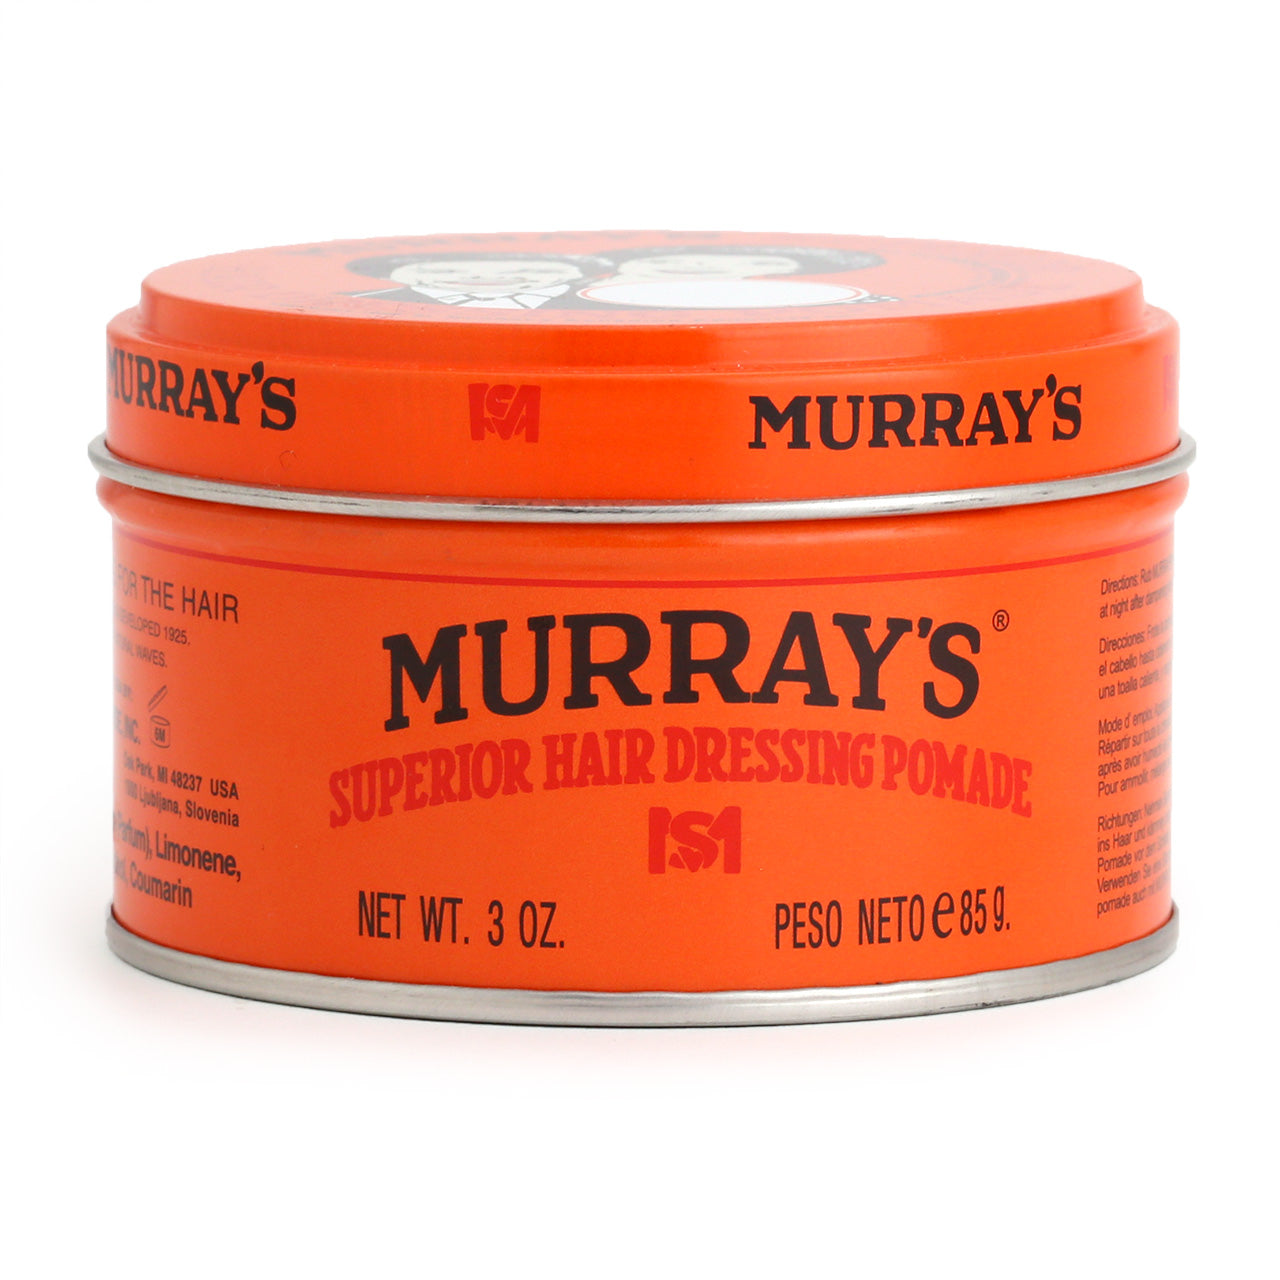 Murrays Superior Hair Dressing Pomade, 85g. Top view